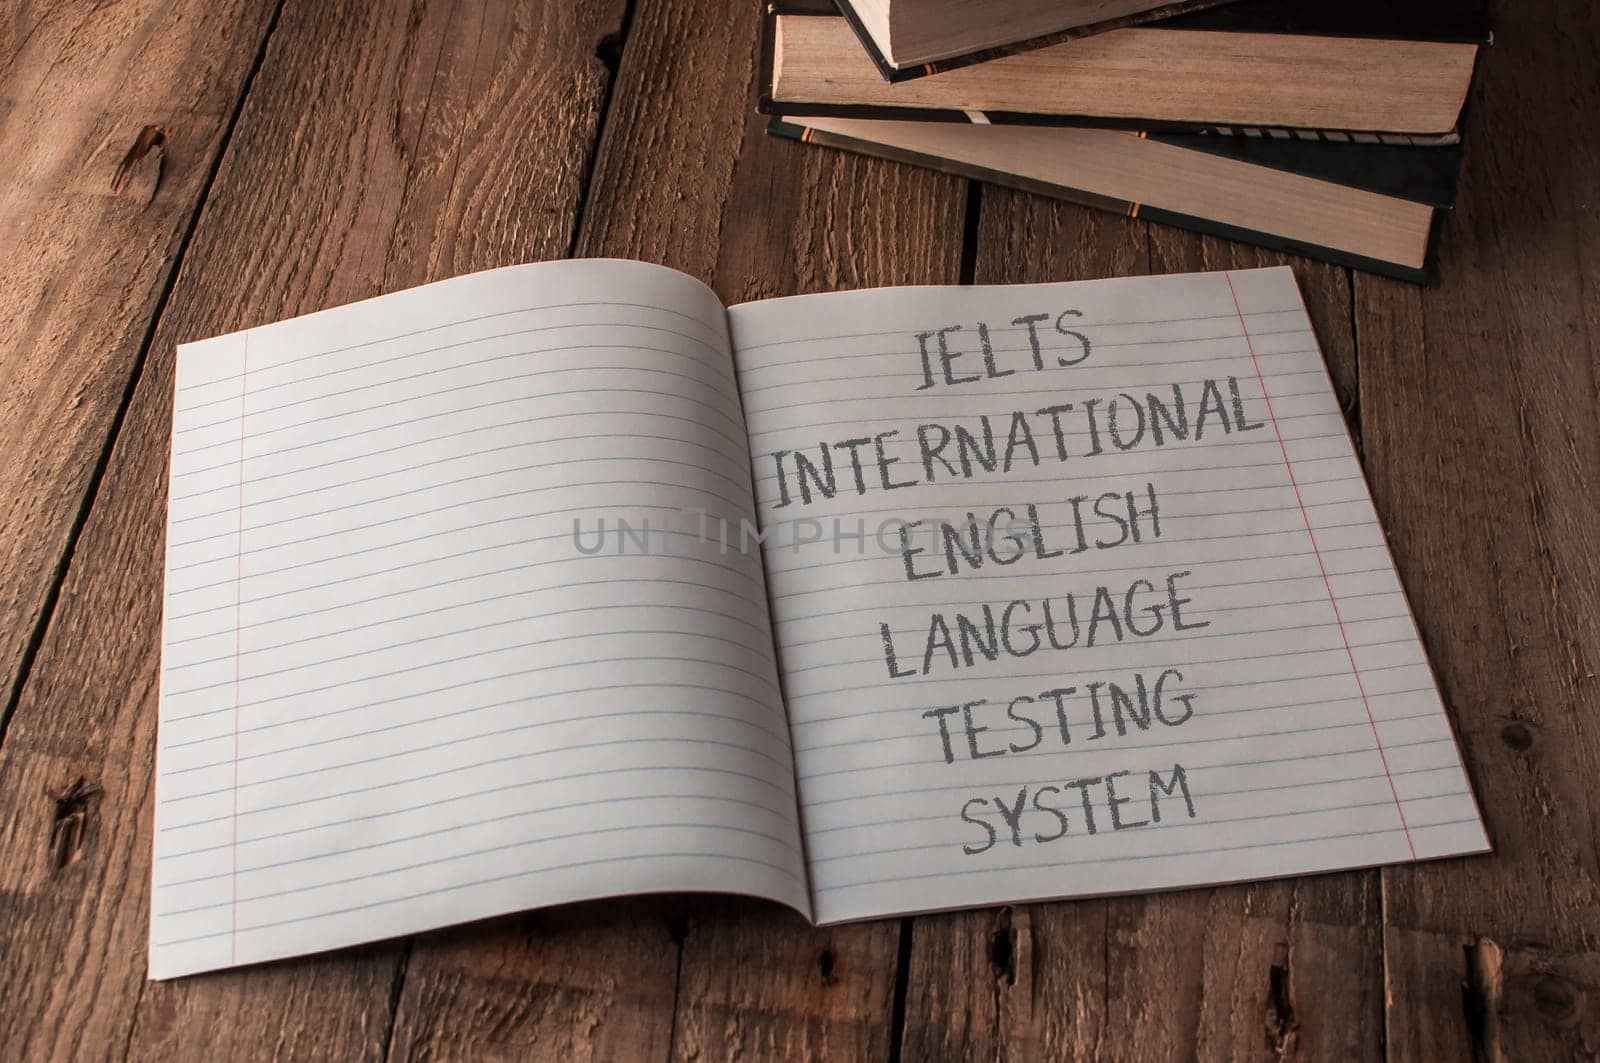 A notebook is open to a page with the words Ielts International English Languag by Alla_Morozova93